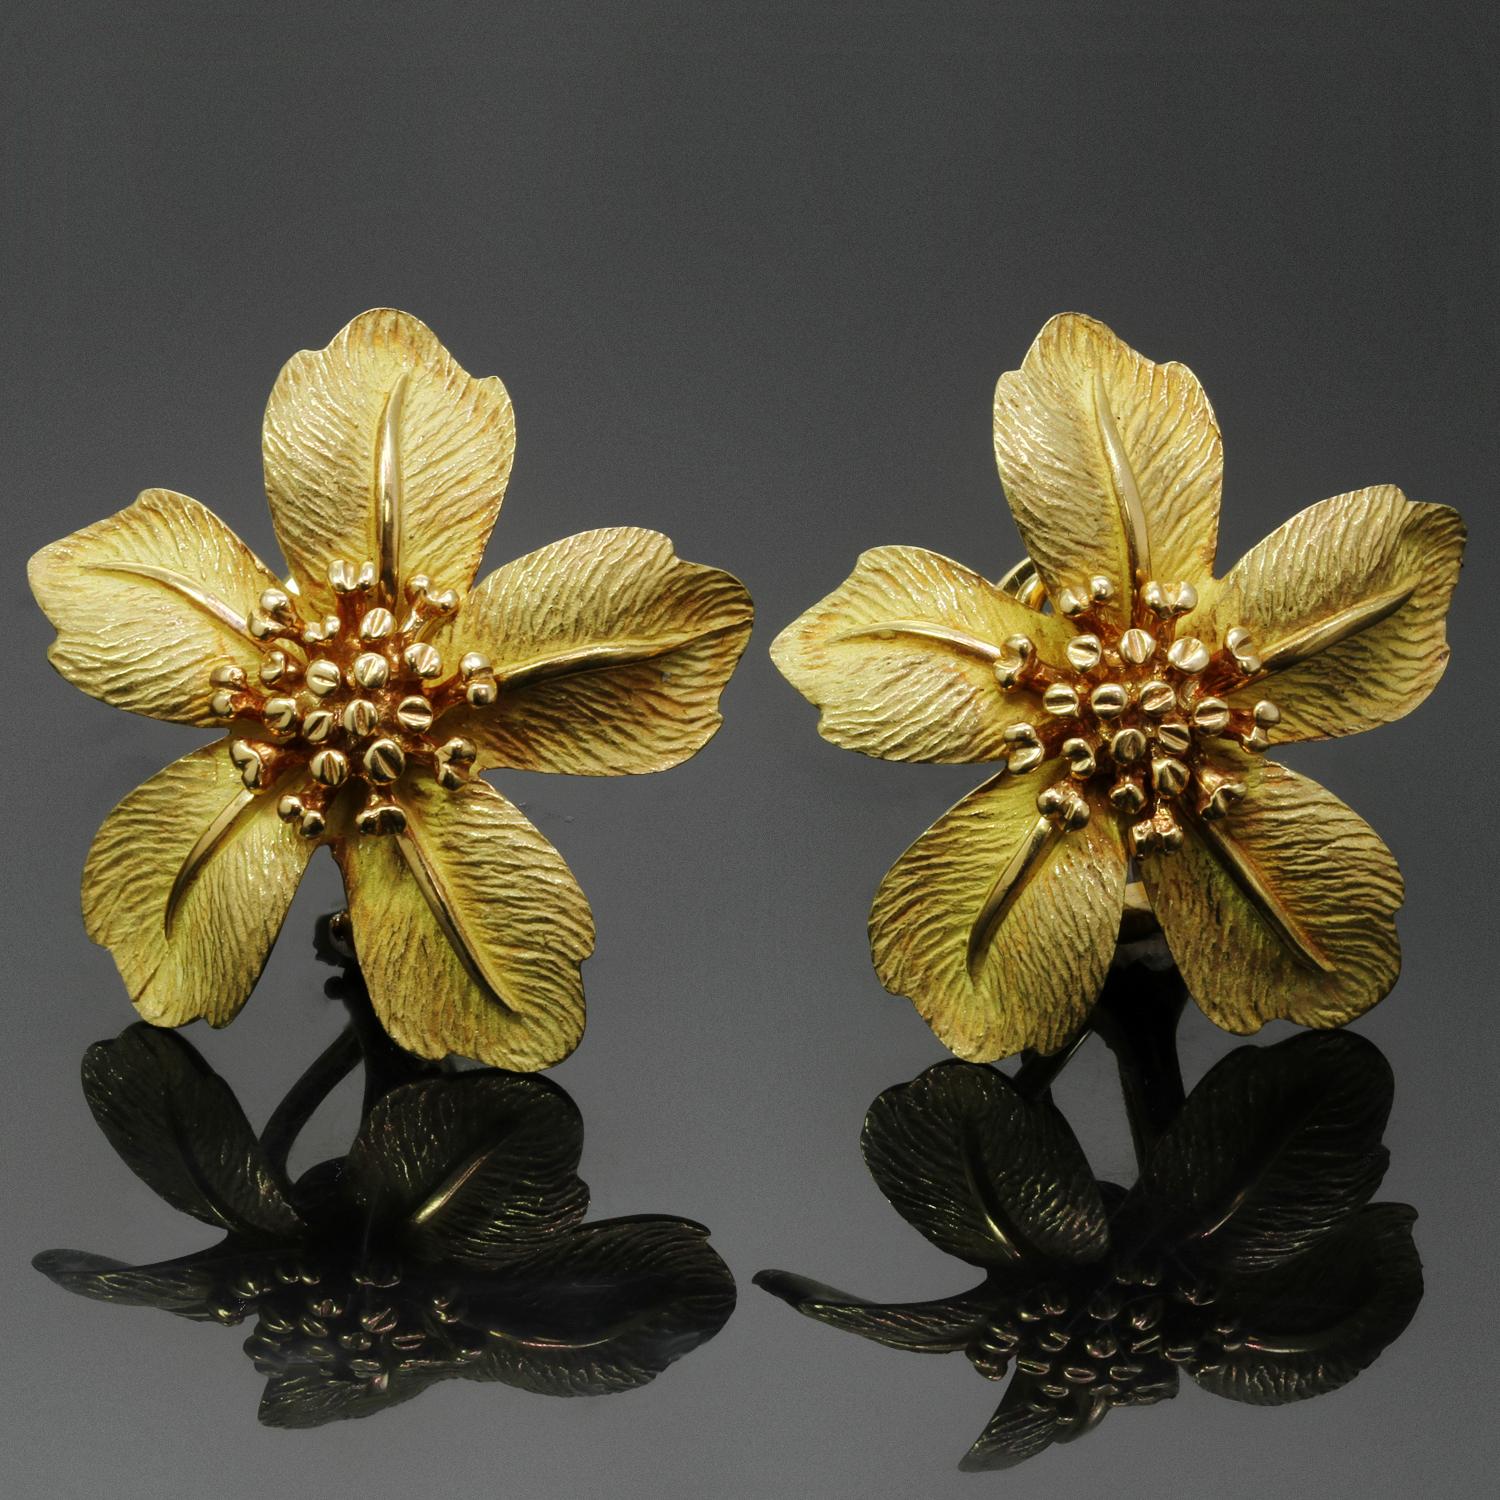 These gorgeous Tiffany & Co. flower earrings feature five stylized petals in etched, satin-finished 18k yellow gold centering elegant stamens. Completed with omega clip-on backs with posts. Made in United States circa 1980s. Measurements: 1.06